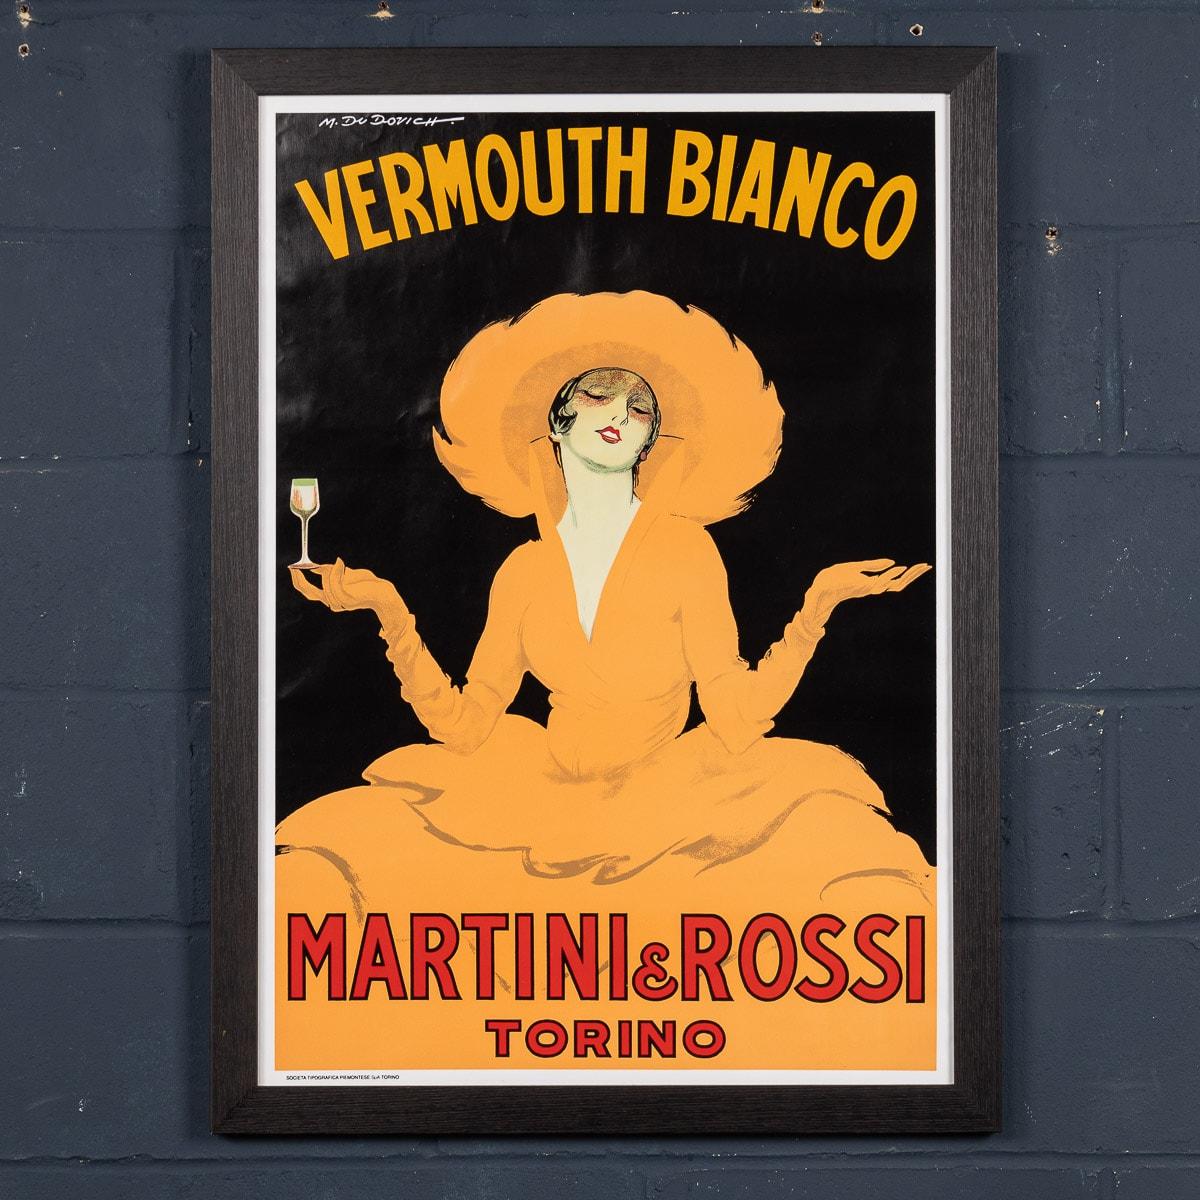 This outstanding Martini poster was designed in the 1930’s and such was its popularity that it was still being used in the 1950’s. It was produced for the Martini & Rossi alcoholic beverage company. This iconic poster features an elegant woman with